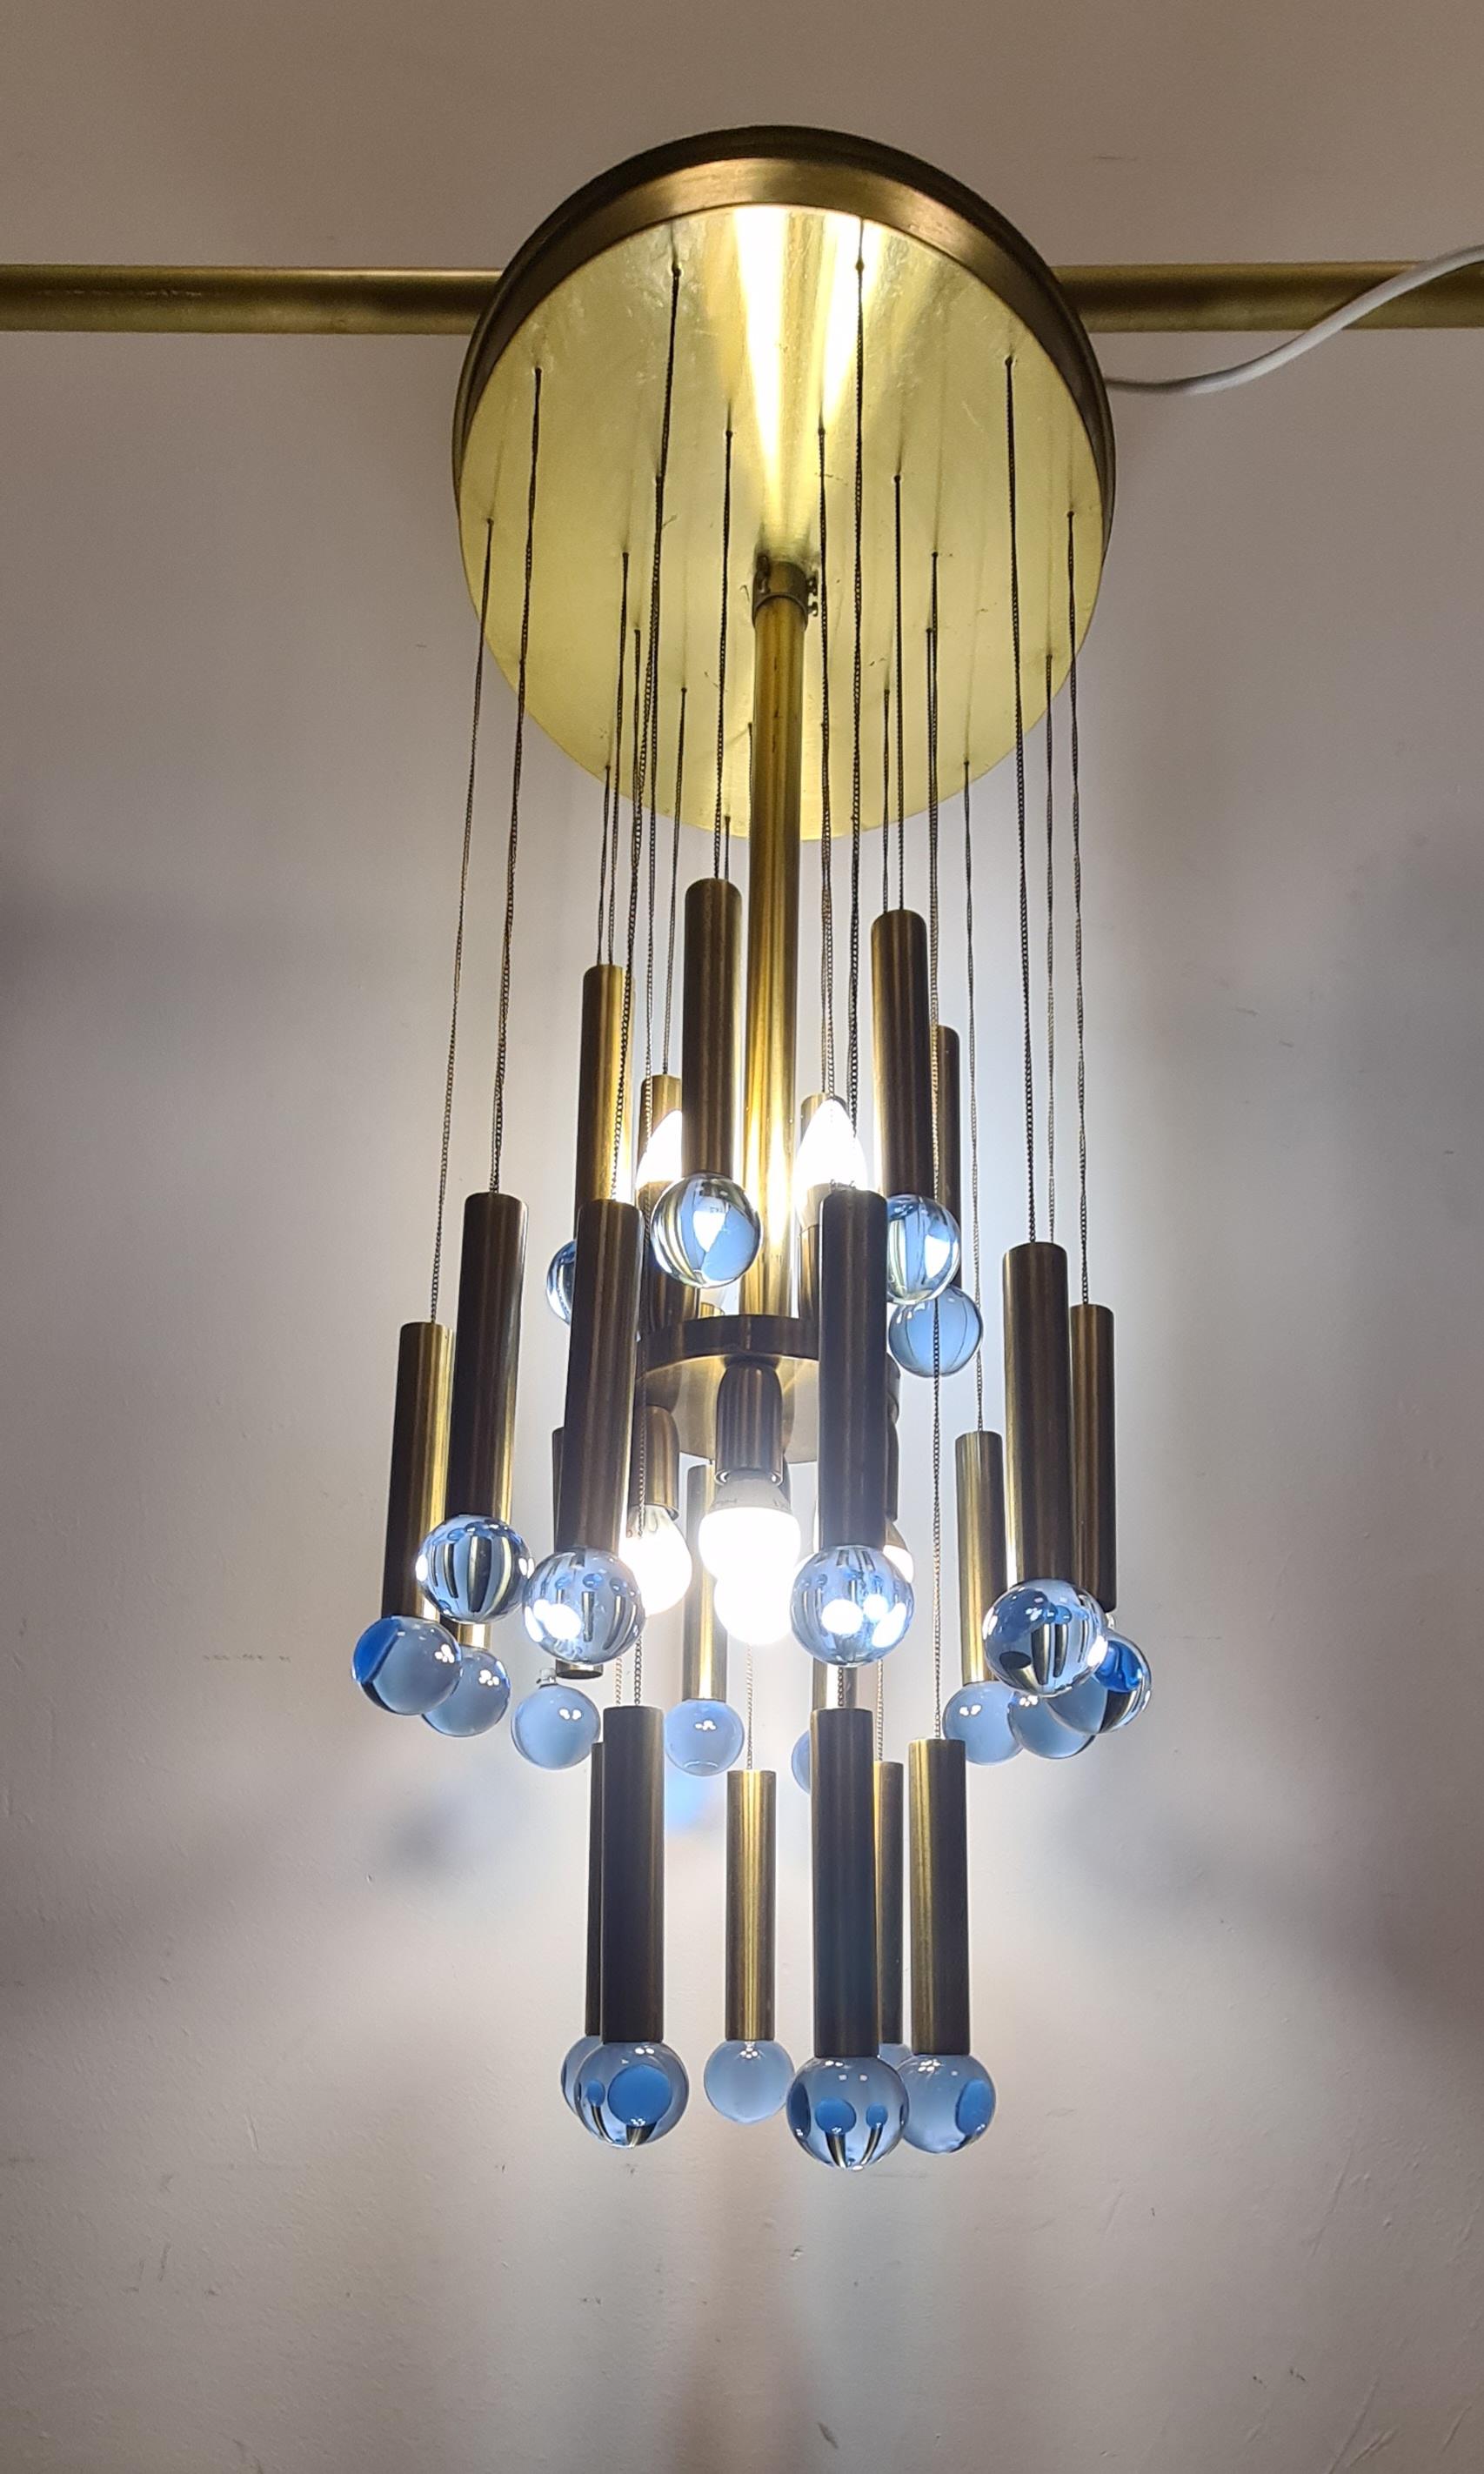 Cascade chandelier produced by Gaetano Sciolari.

Refined and scenic waterfall chandelier made of chrome-plated metal and Murano glass.

Consisting of a ceiling light fixture to be attached to the ceiling from which a central body with eight lights